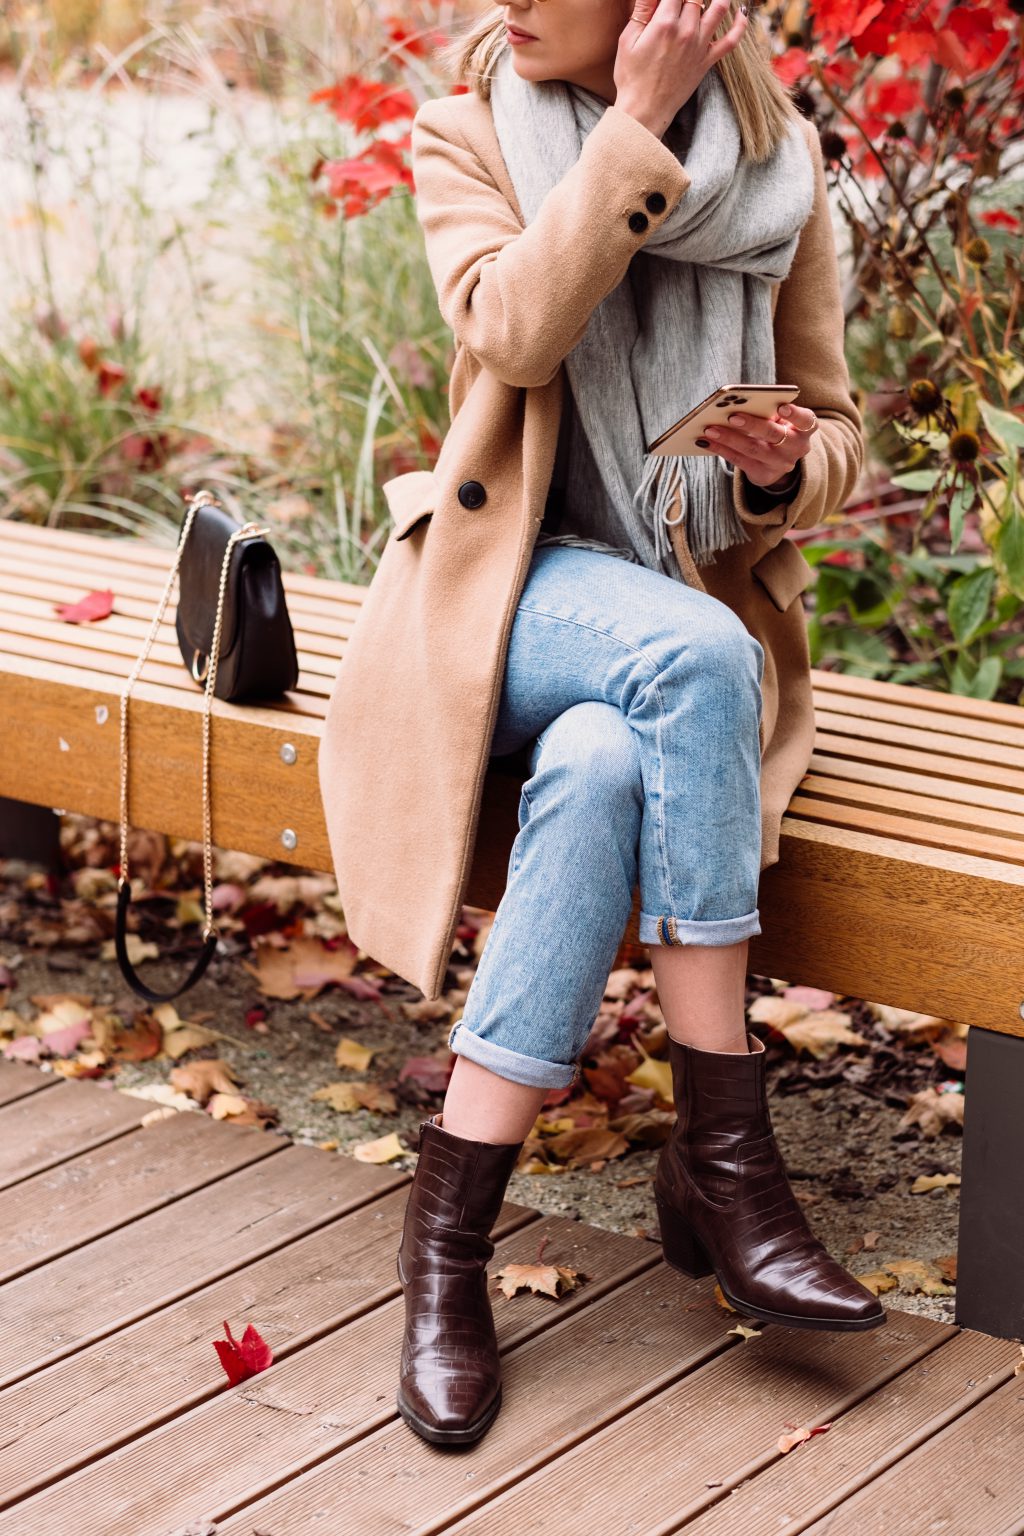 A female sitting on a bench and using her phone on an autumn day 3 - free stock photo